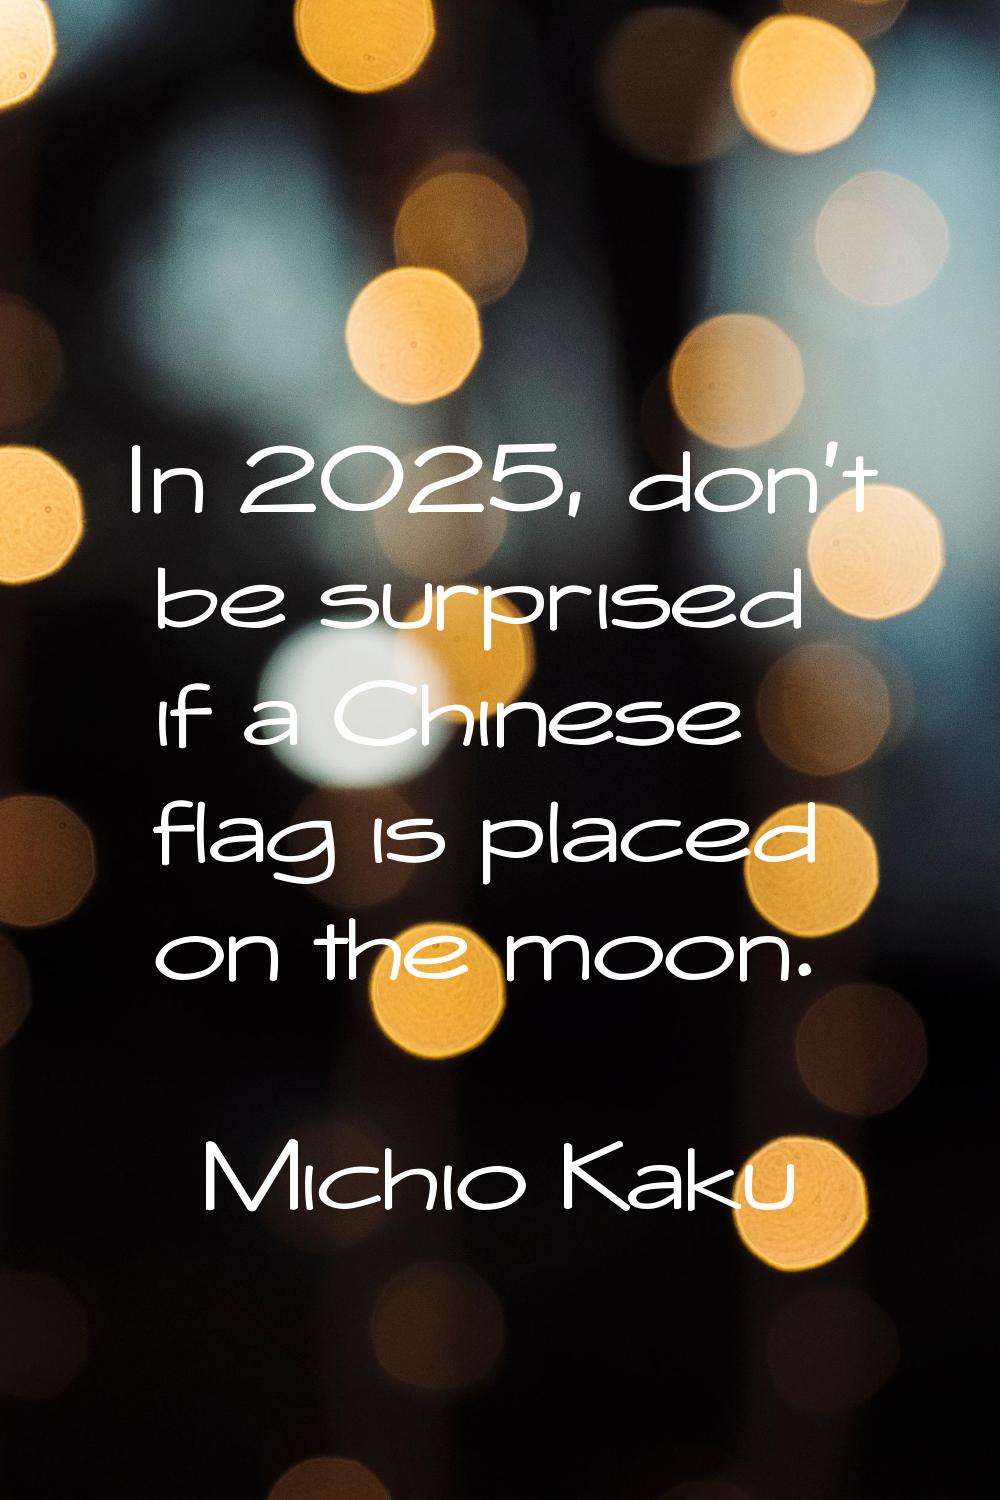 In 2025, don't be surprised if a Chinese flag is placed on the moon.